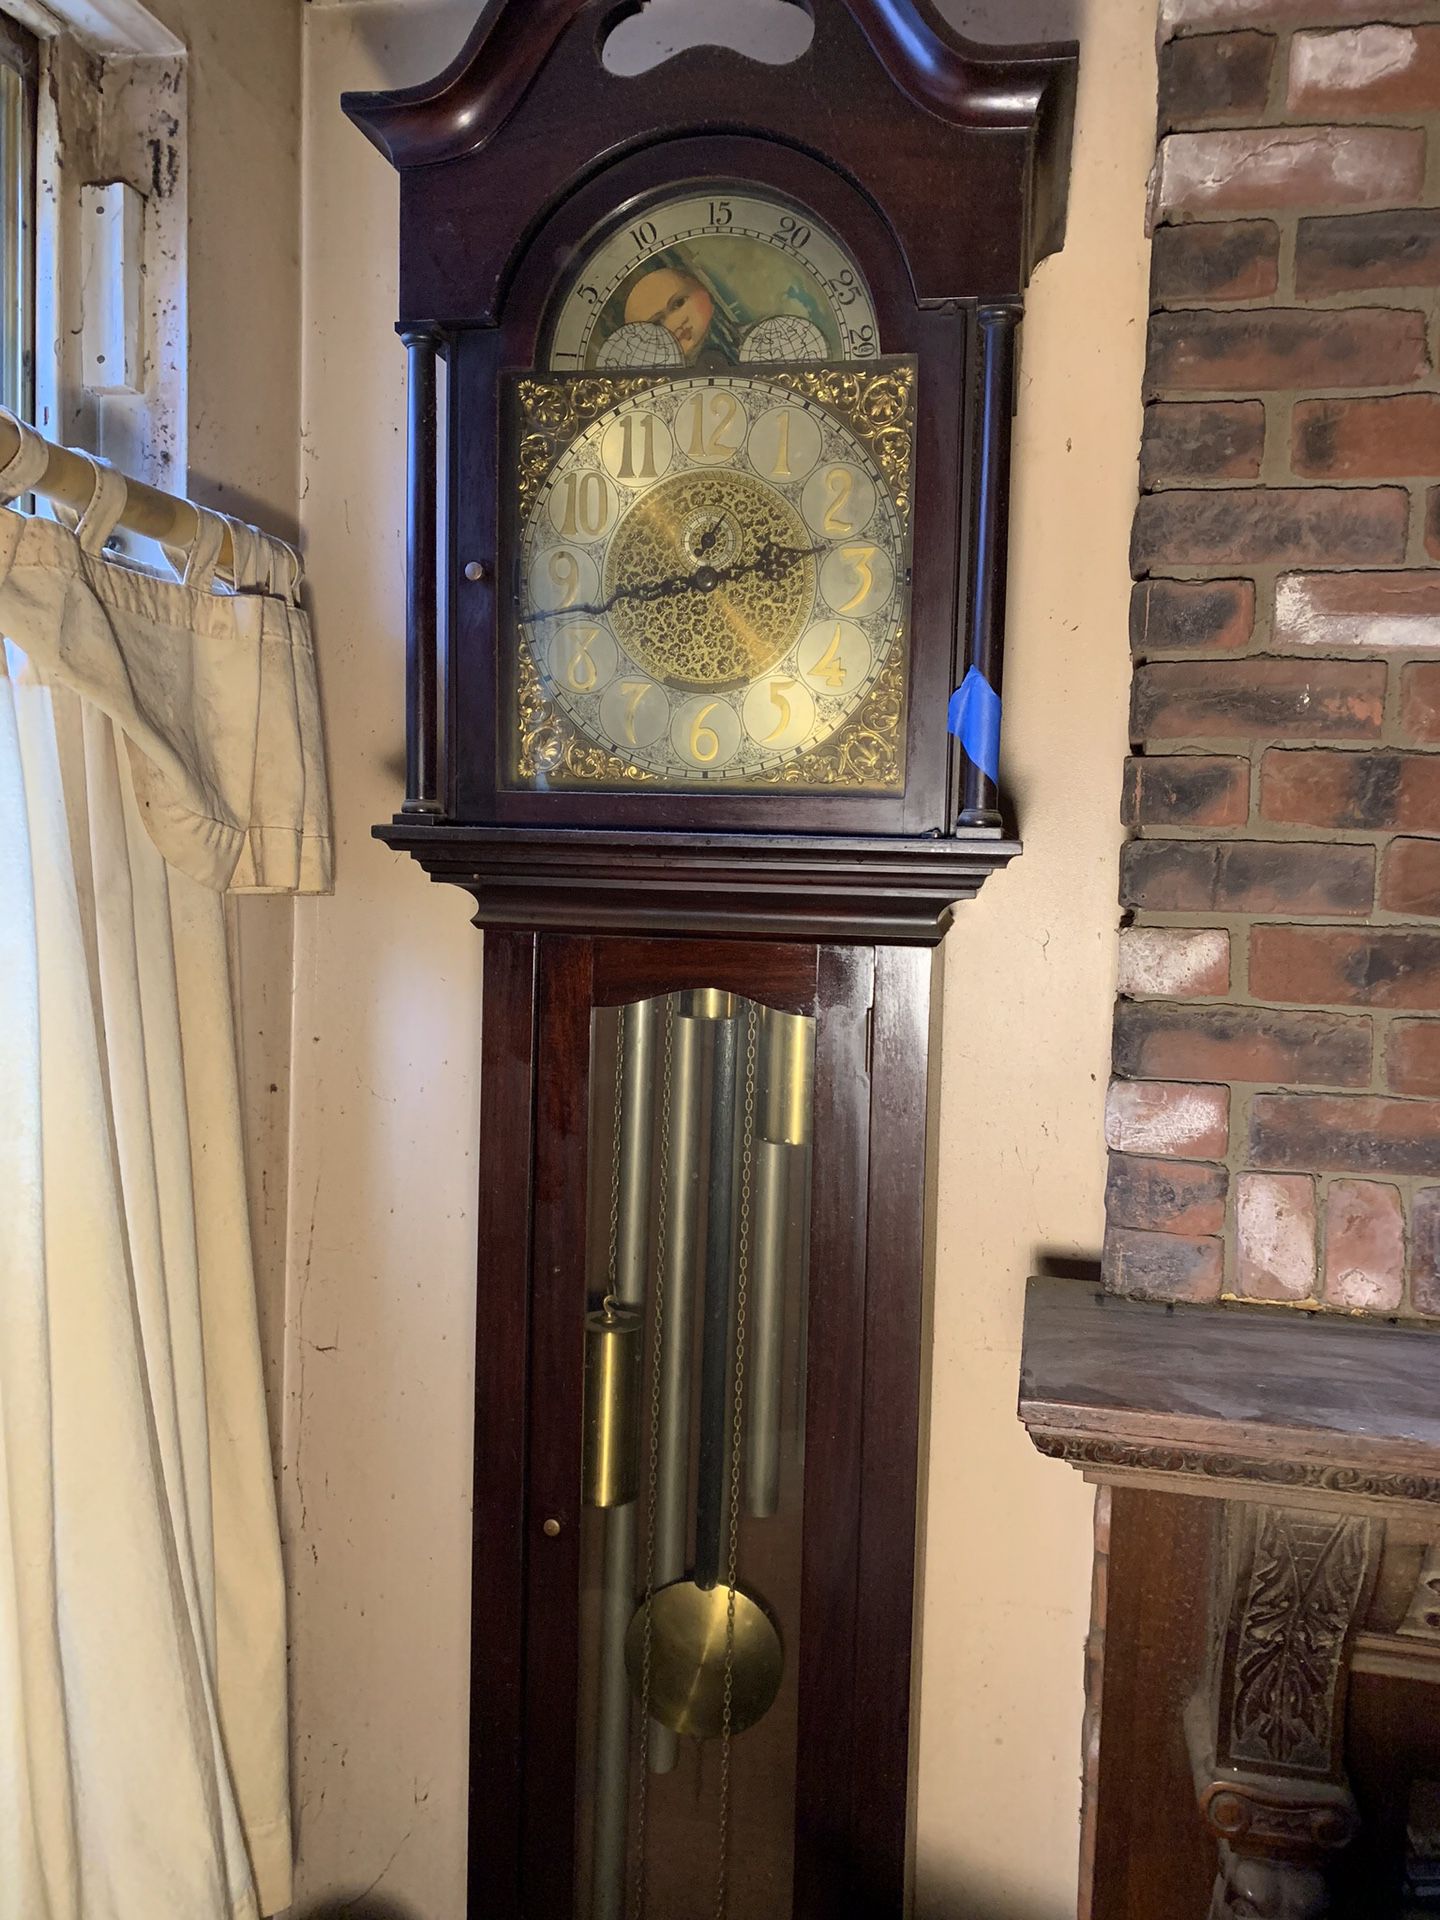 Antique stunning German grandfather clock 5 tube needs a good cleaning. sold as is